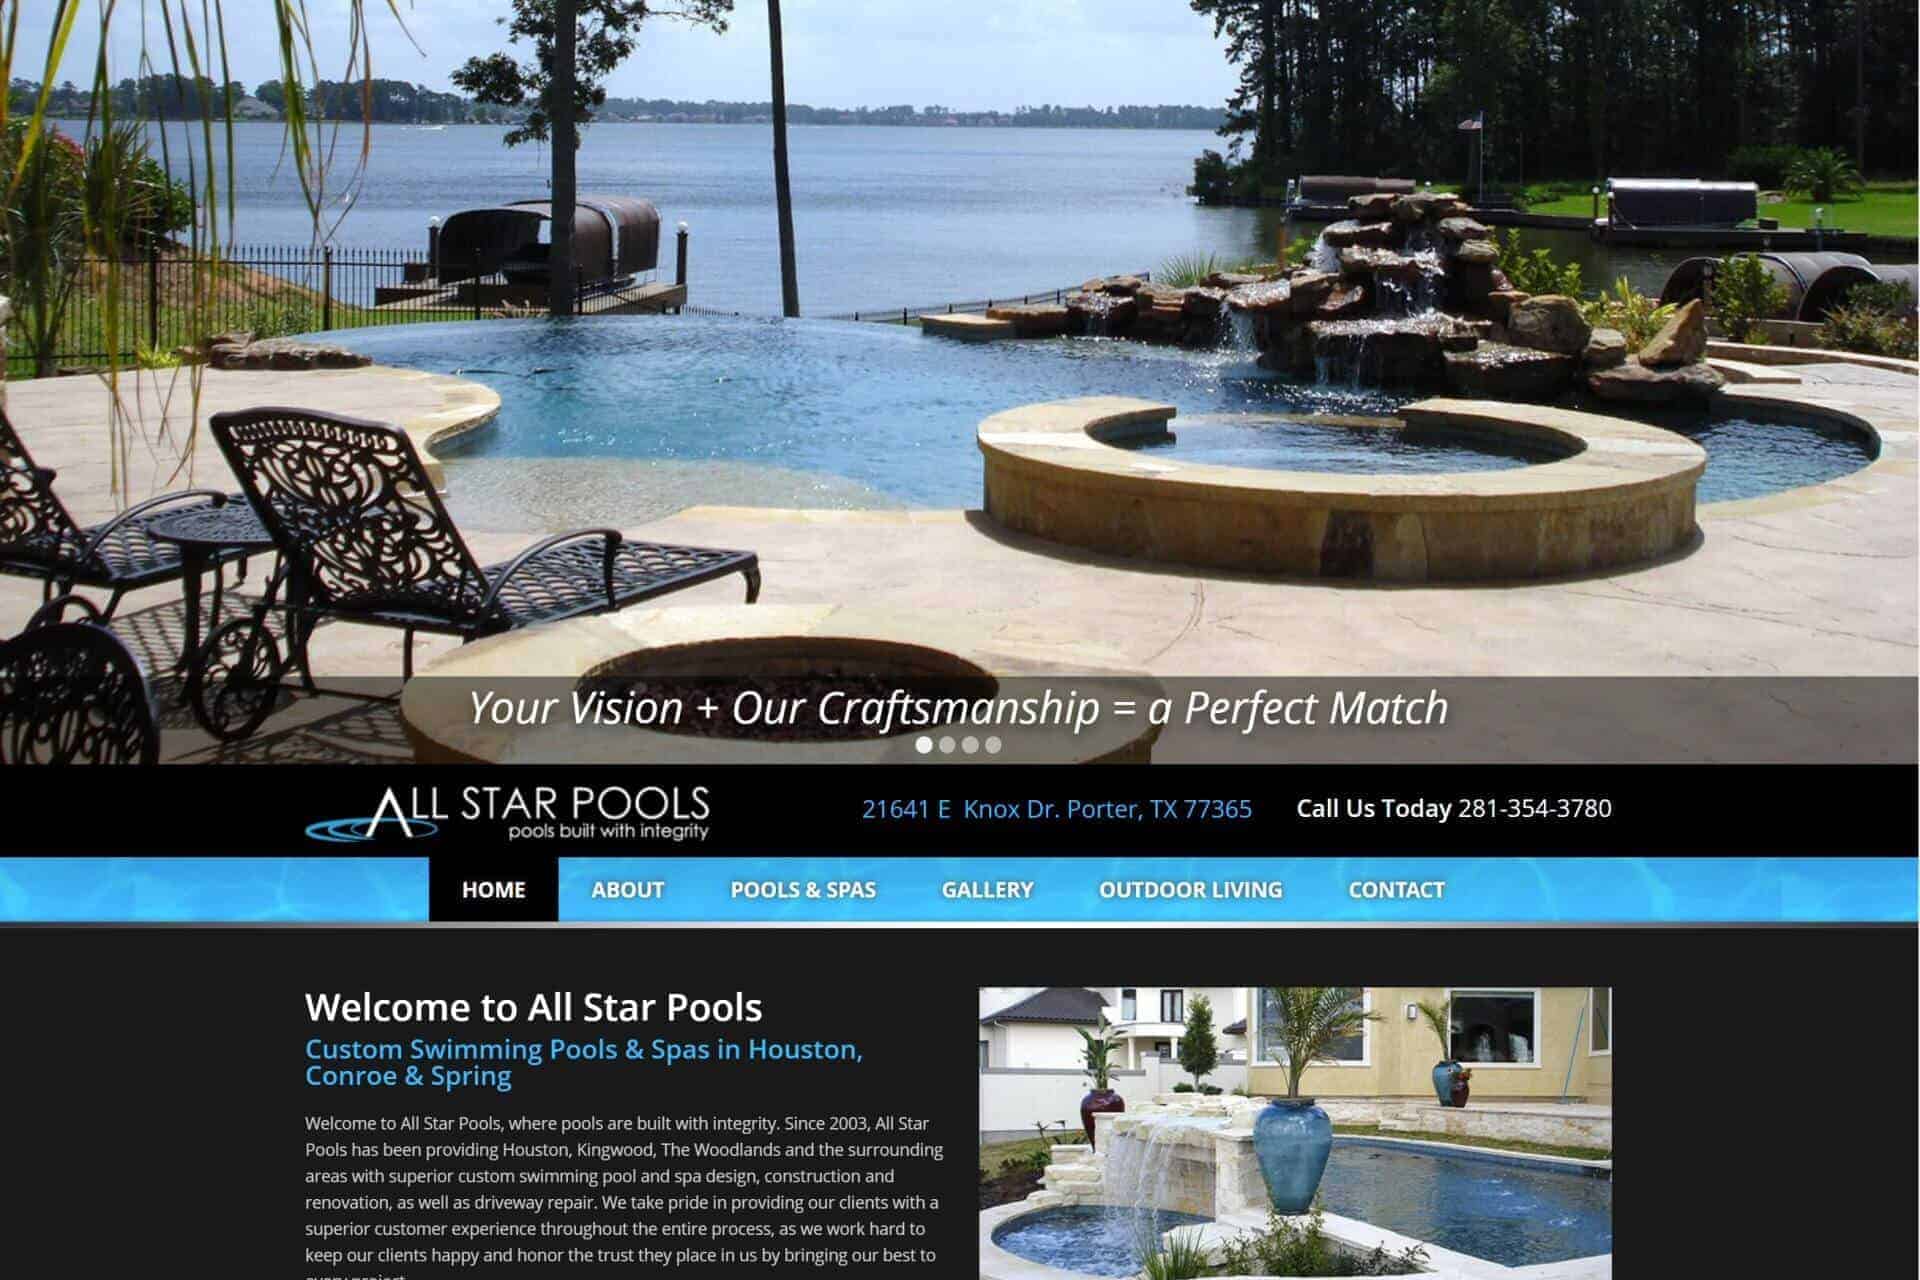 All Star Pools by Triton Construction Company